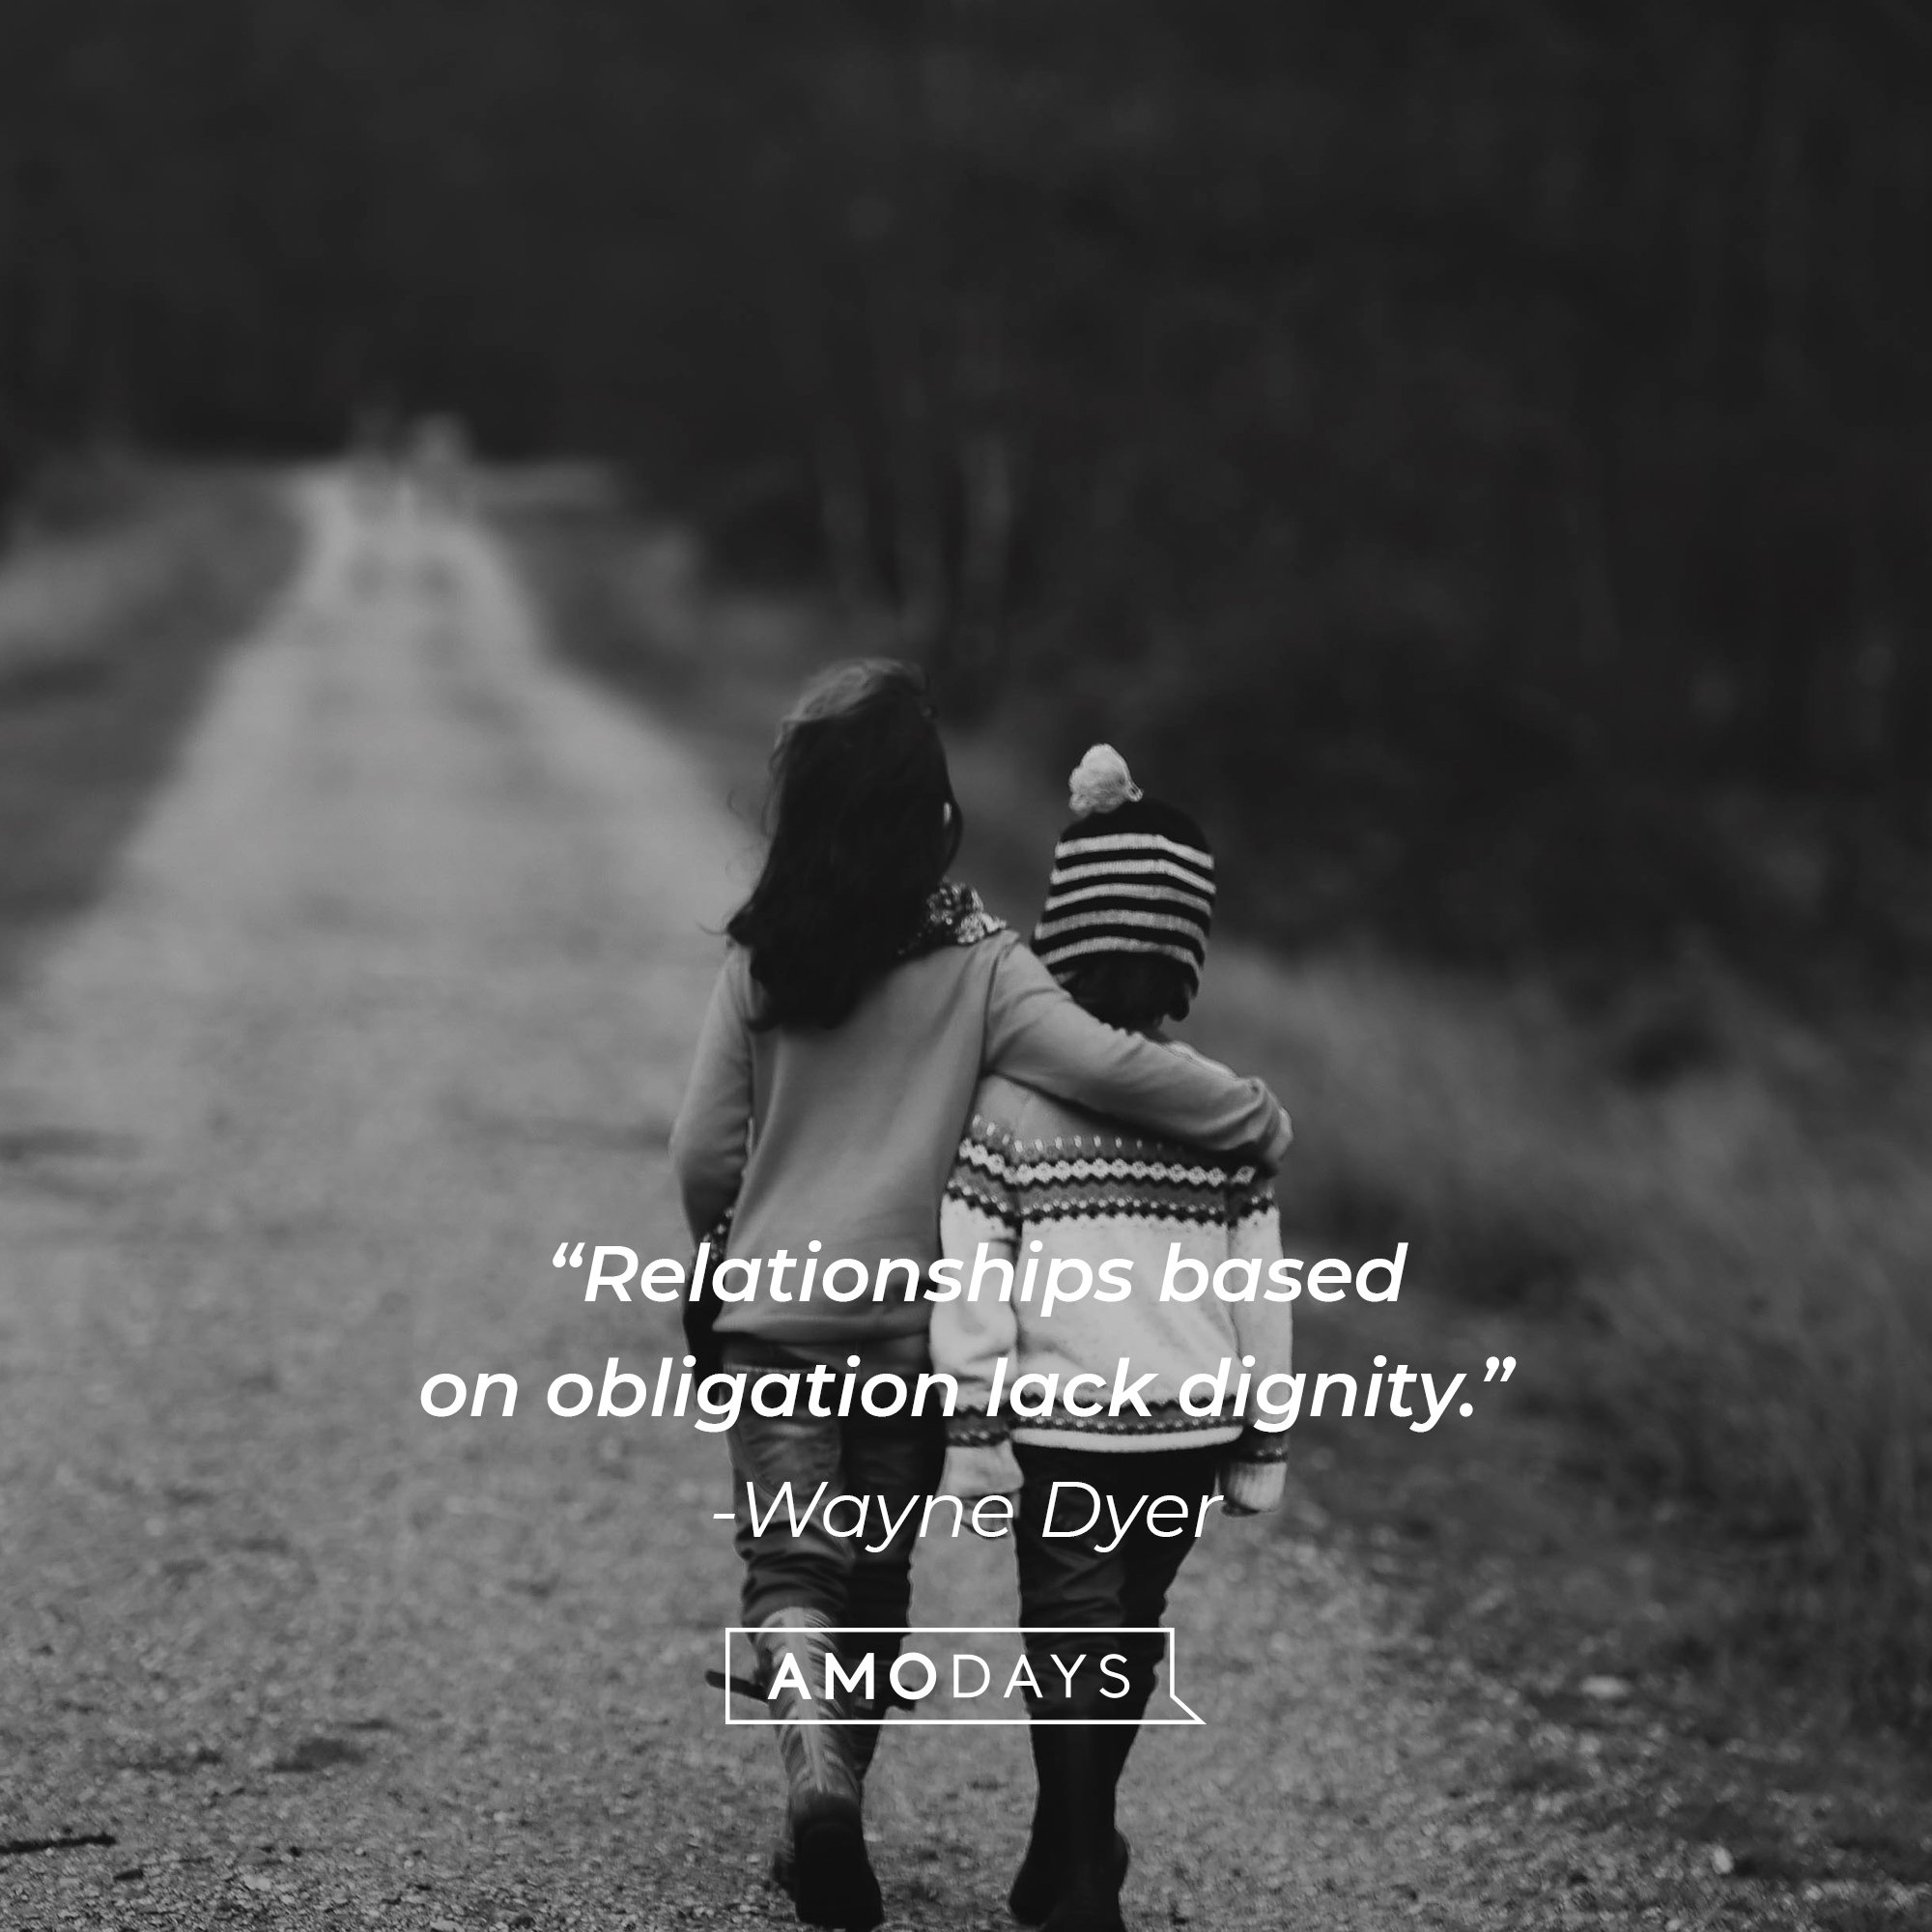 Wayne Dyer's quote: “Relationships based on obligation lack dignity.” | Image: AmoDays